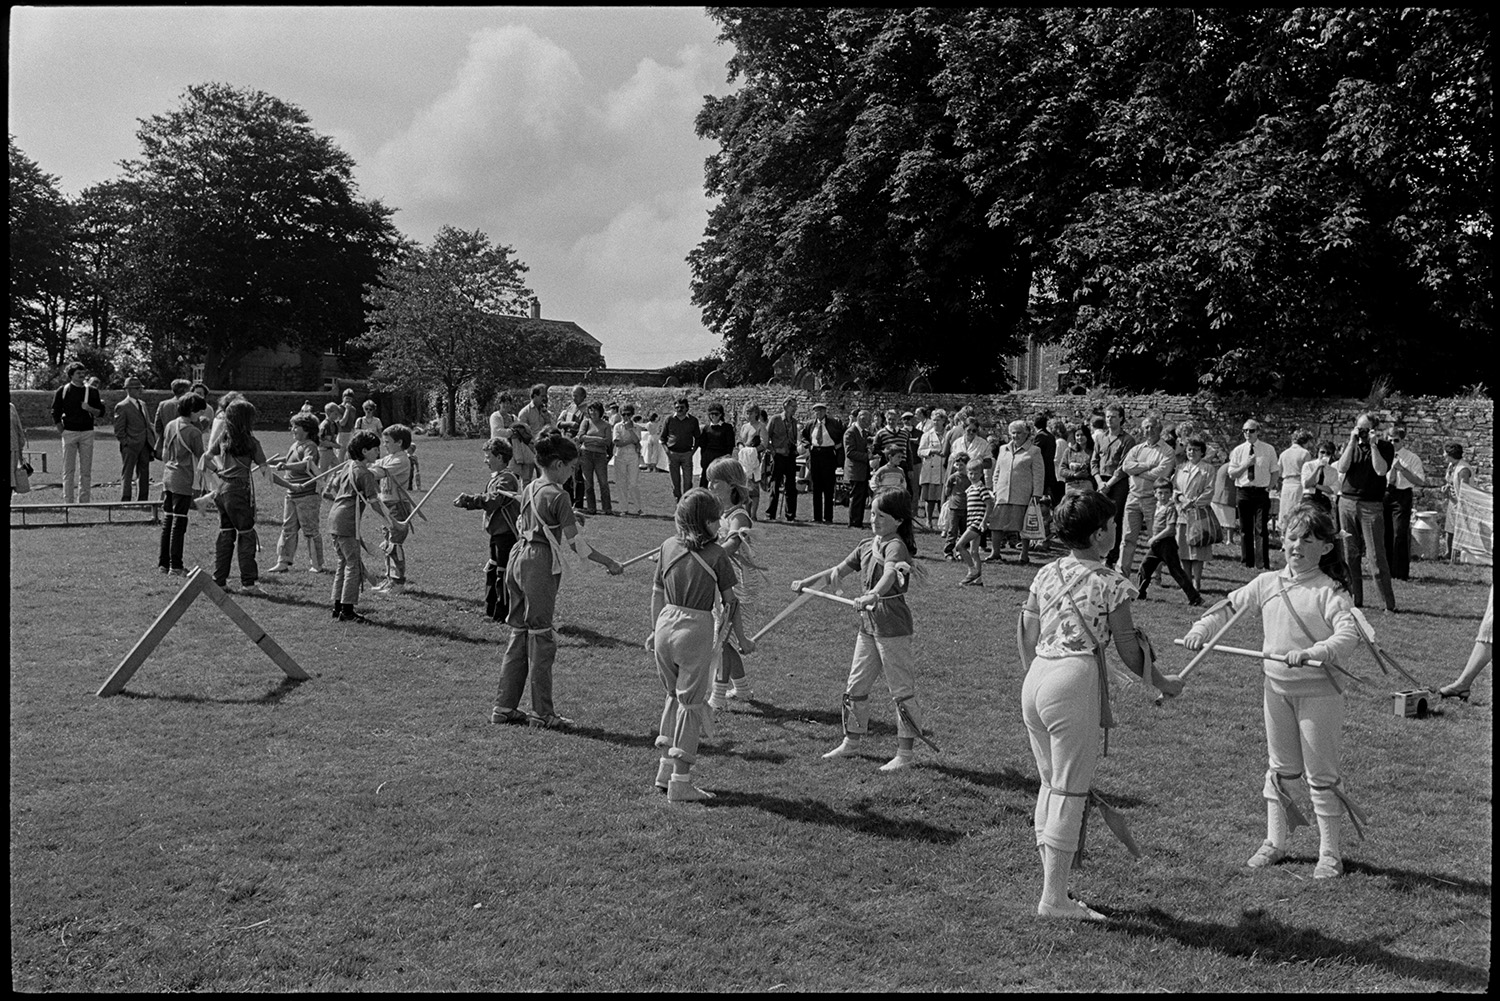 Village revel, fete, folk dance on green, stalls, jumble, guess weight of the Ram, fancy dress.
[Children Morris dancing at Beaford Revel on the village green. The churchyard wall with large trees and a crowd of spectator are visible in the background.]